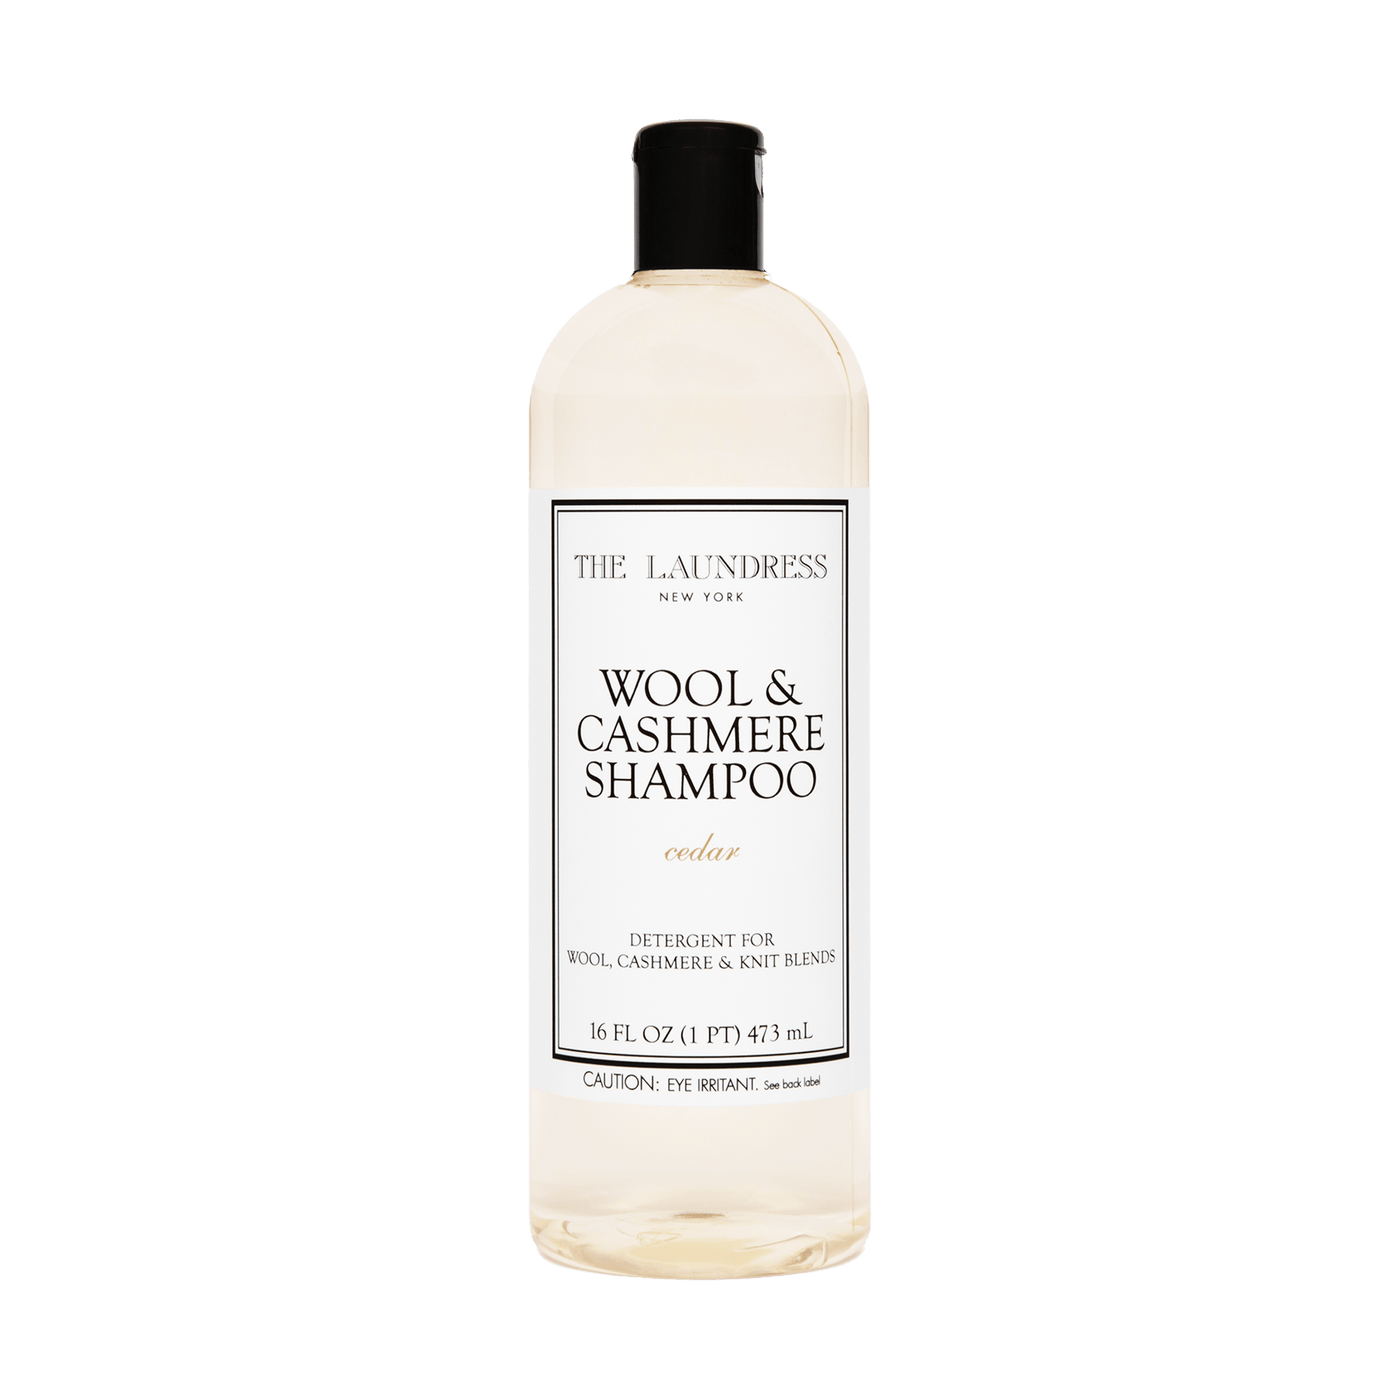 The Laundress Wool & Cashmere Shampoo, a detergent made for wool, cashmere, and knit fabrics.